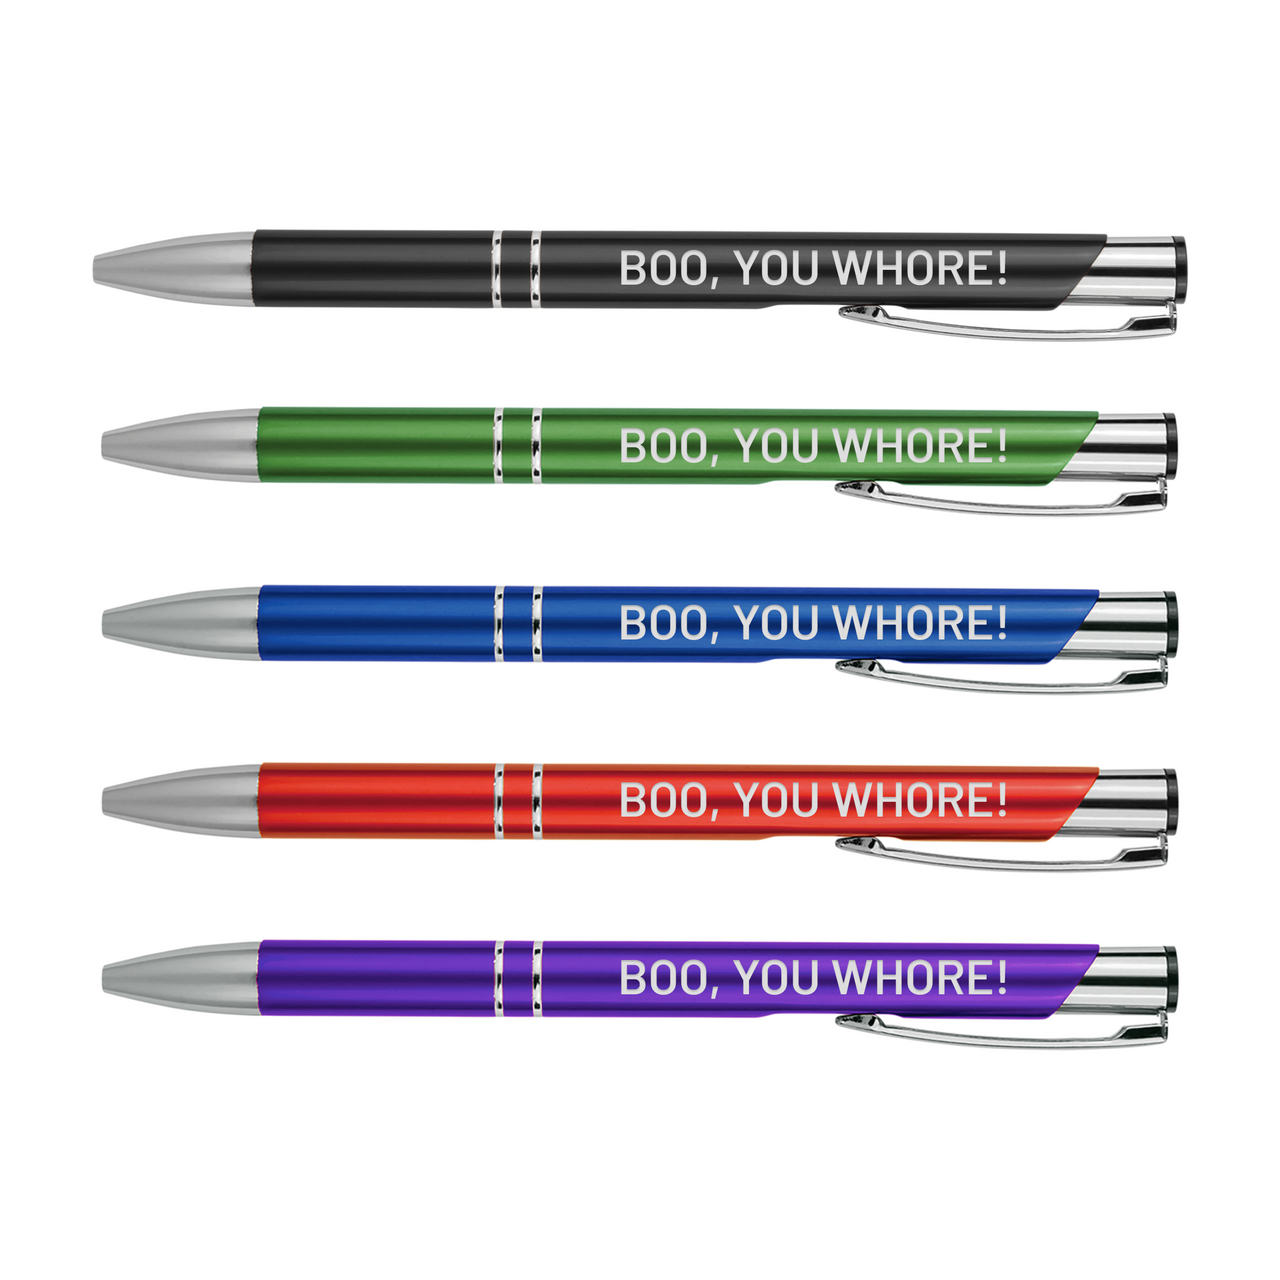 Boo, You Whore! Metal Pens | Motivational Writing Tools Office Supplies Coworker Gifts Stocking Stuffer Baum Designs